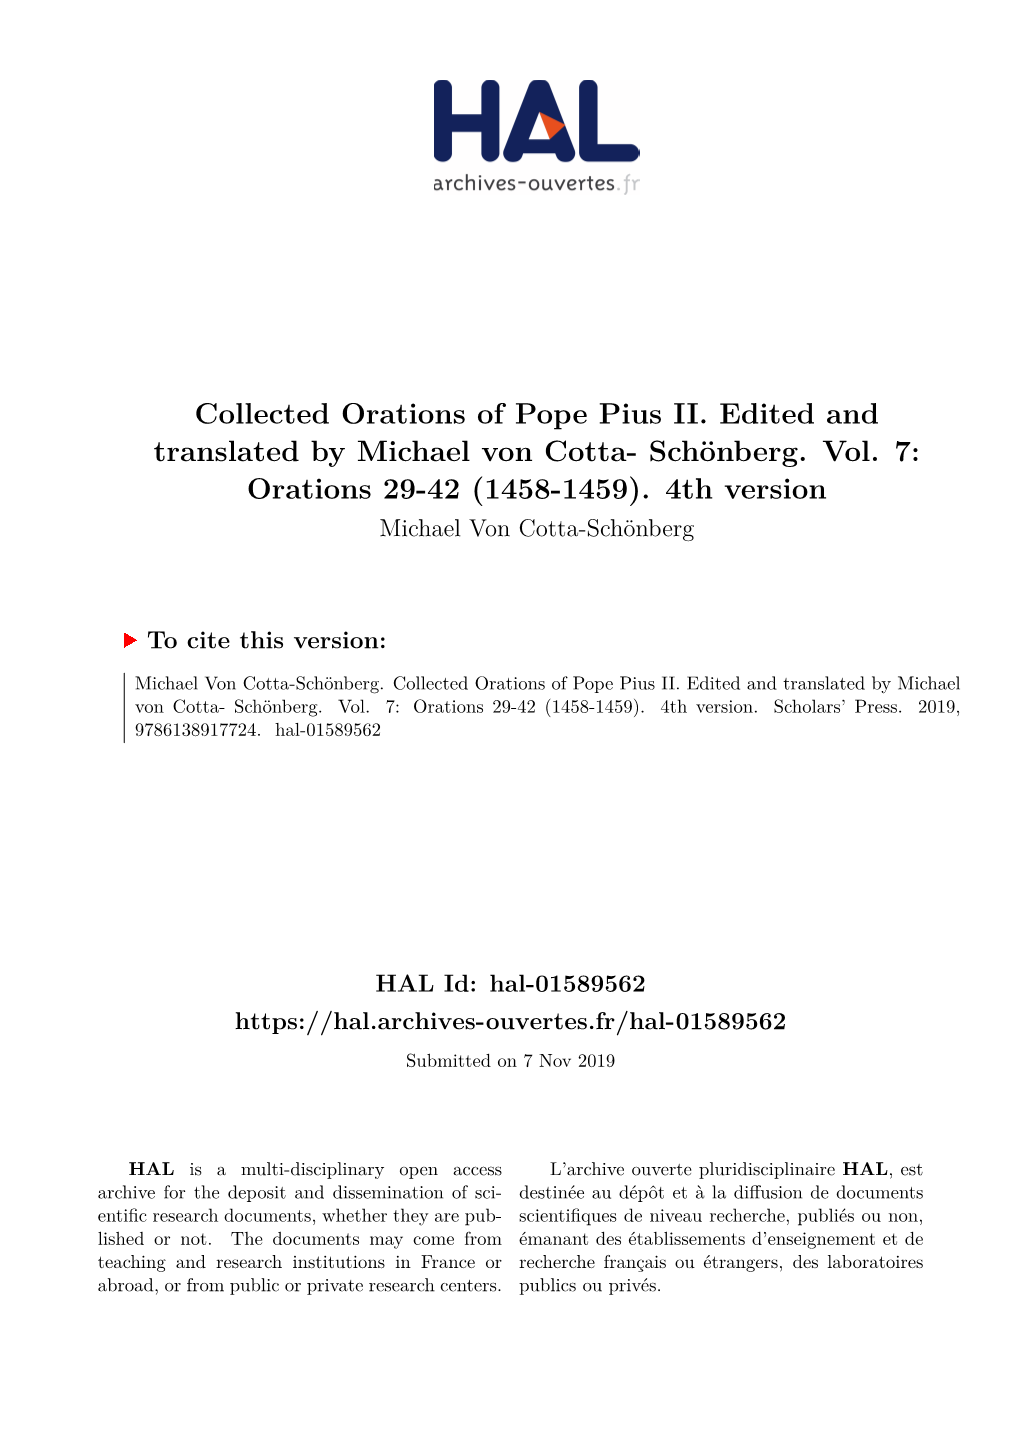 Collected Orations of Pope Pius II. Edited and Translated by Michael Von Cotta- Schönberg